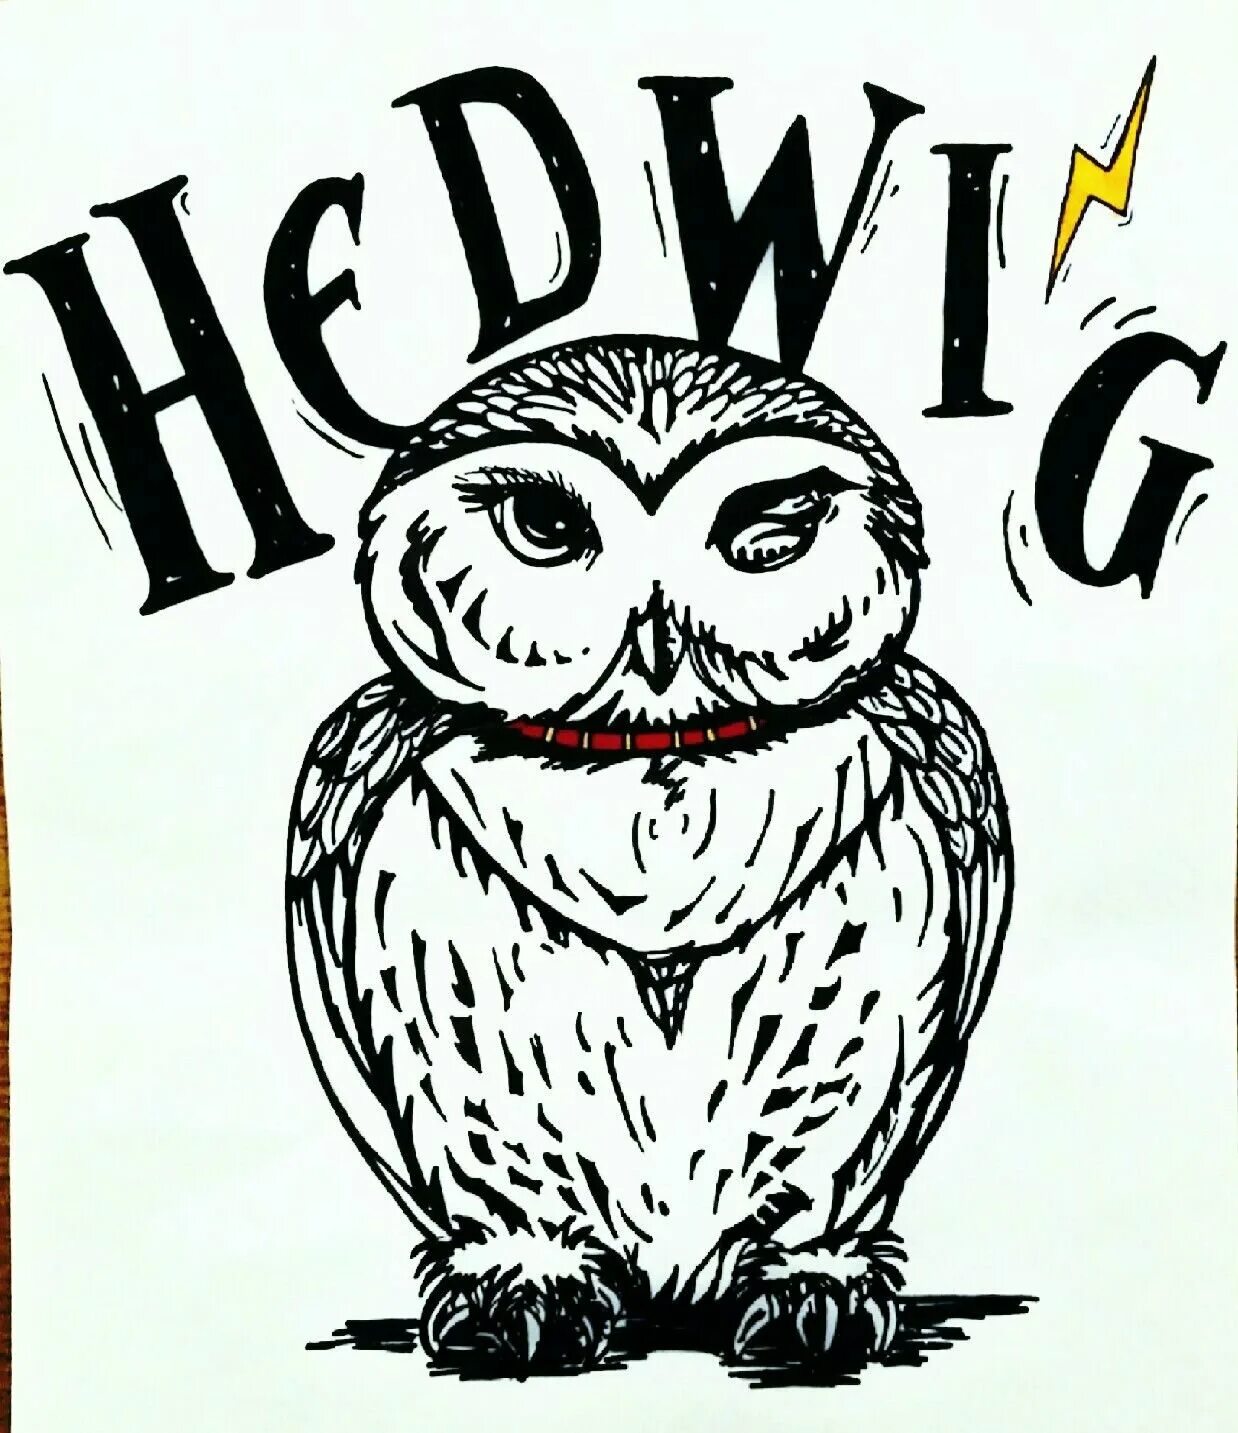 Cheerful Hedwig Owl coloring book